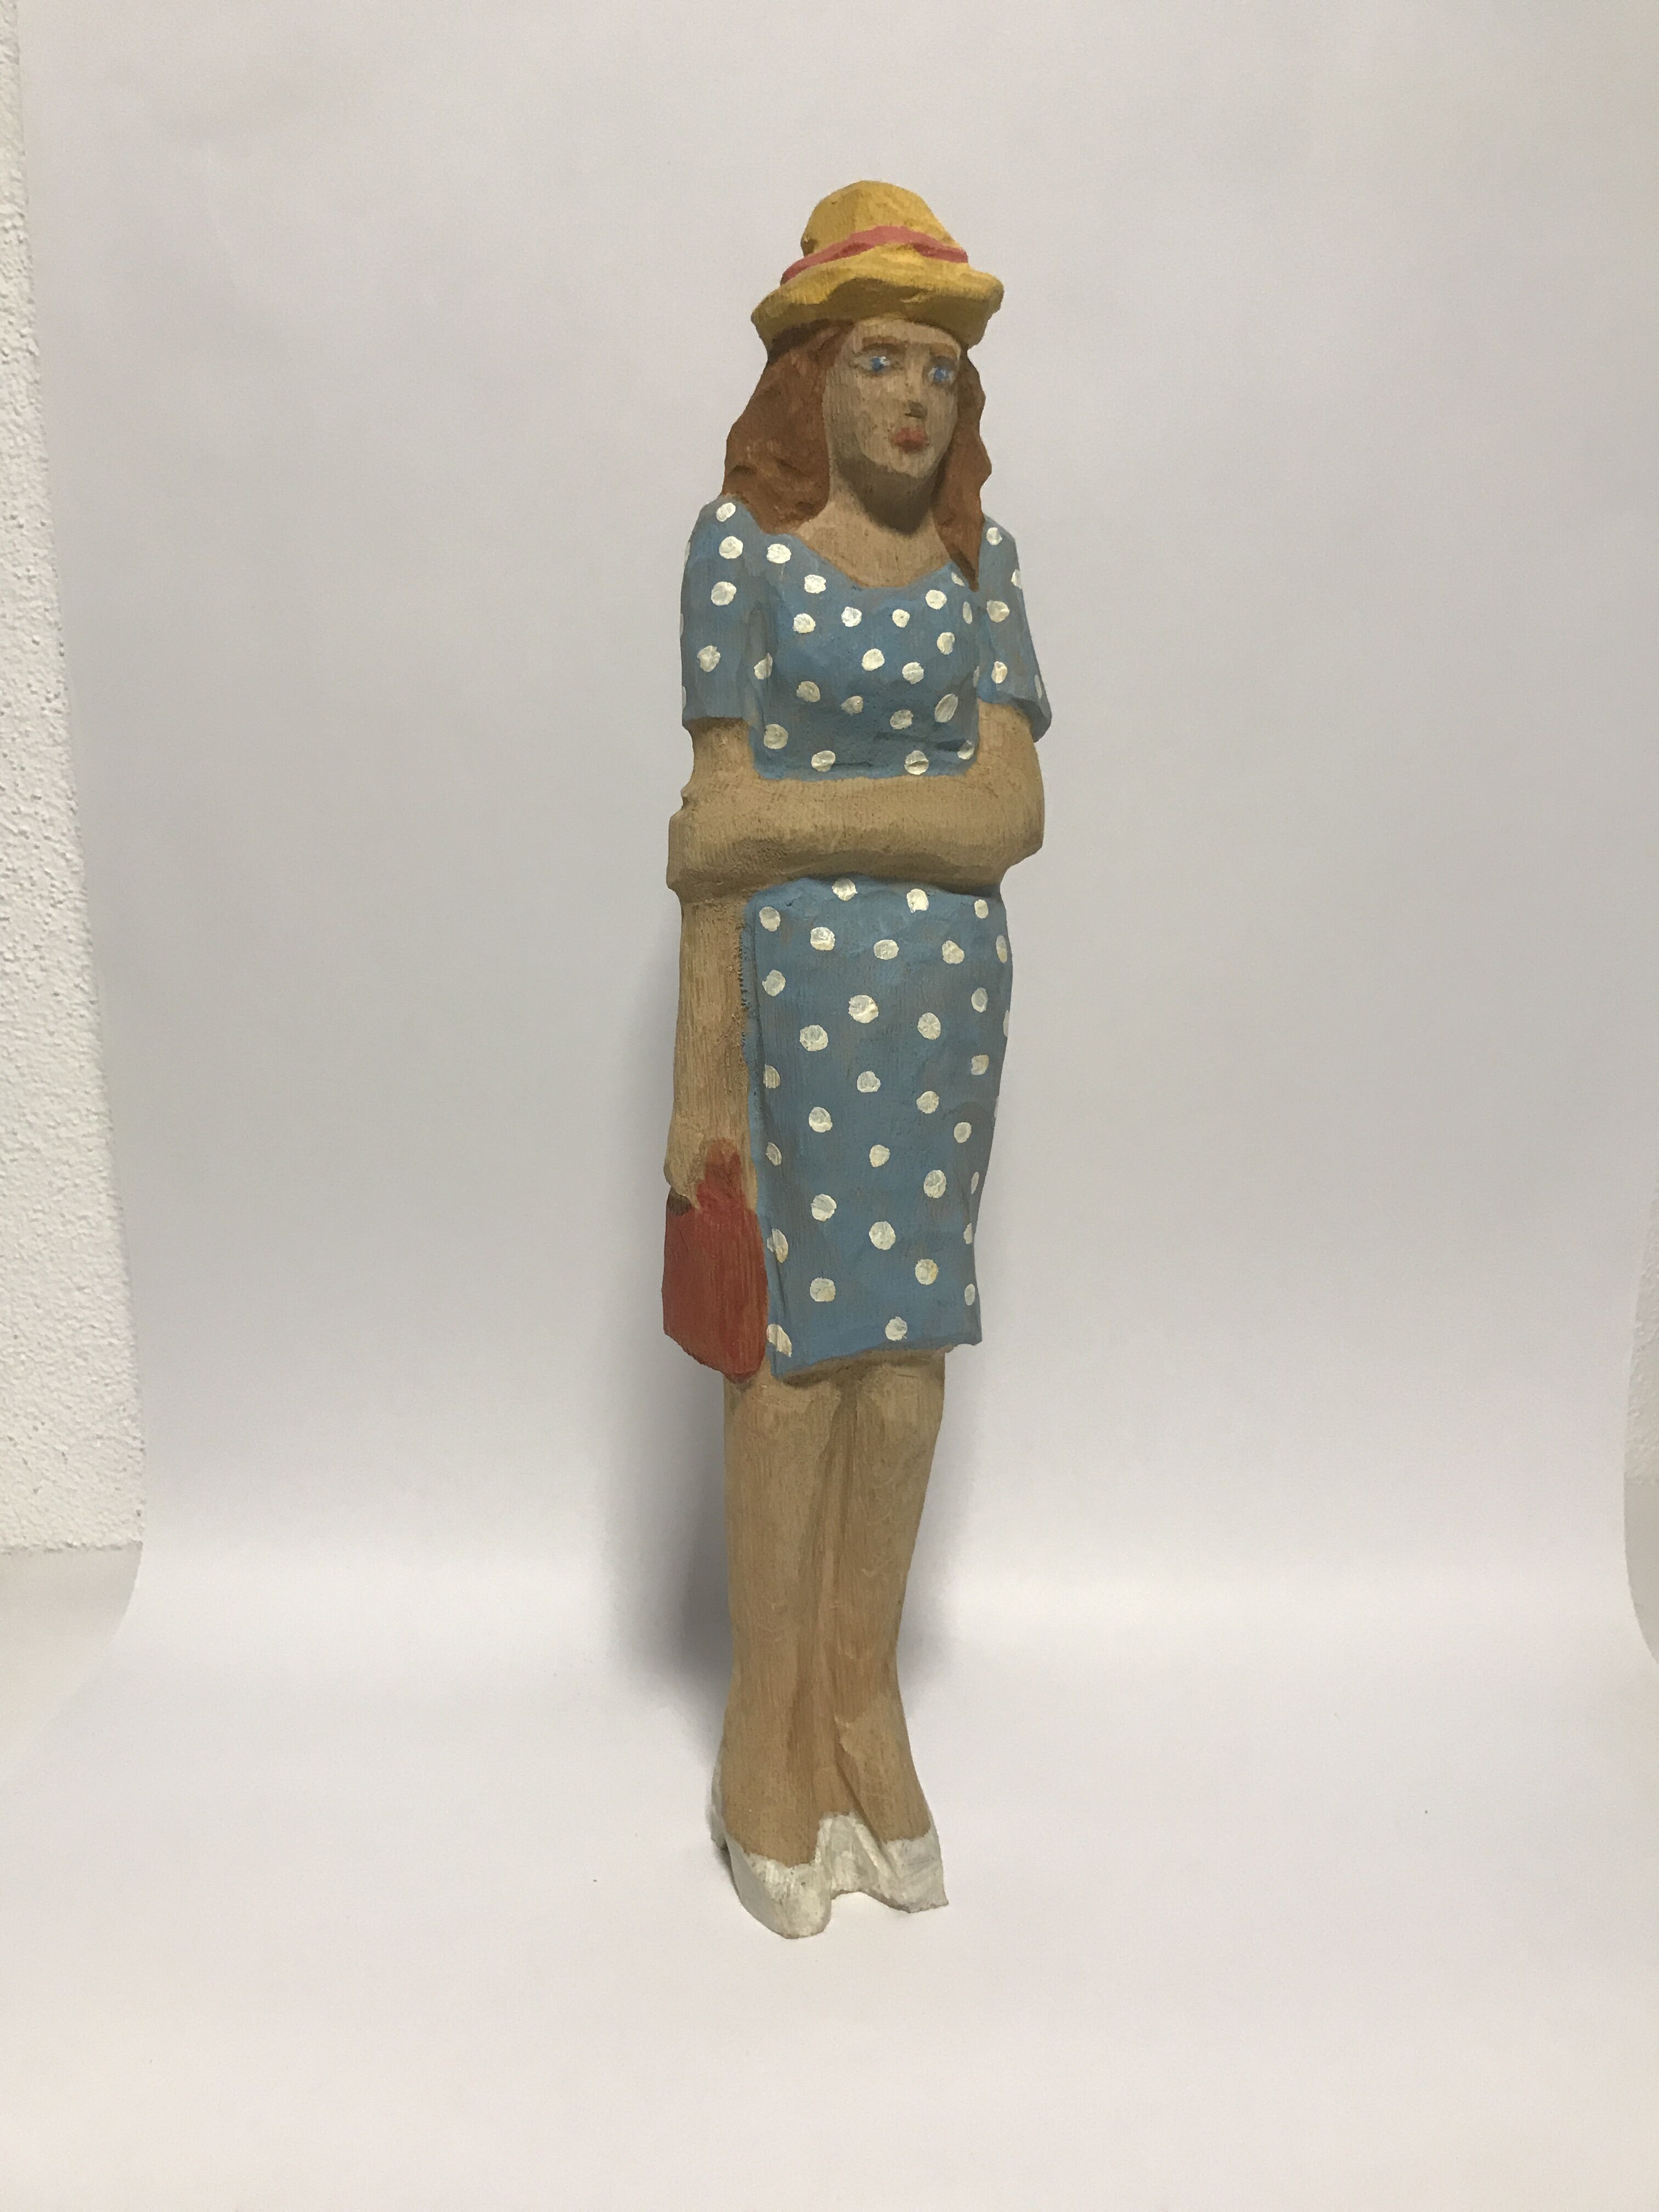 Sculpture "Woman in summer dress with hat" (2022)